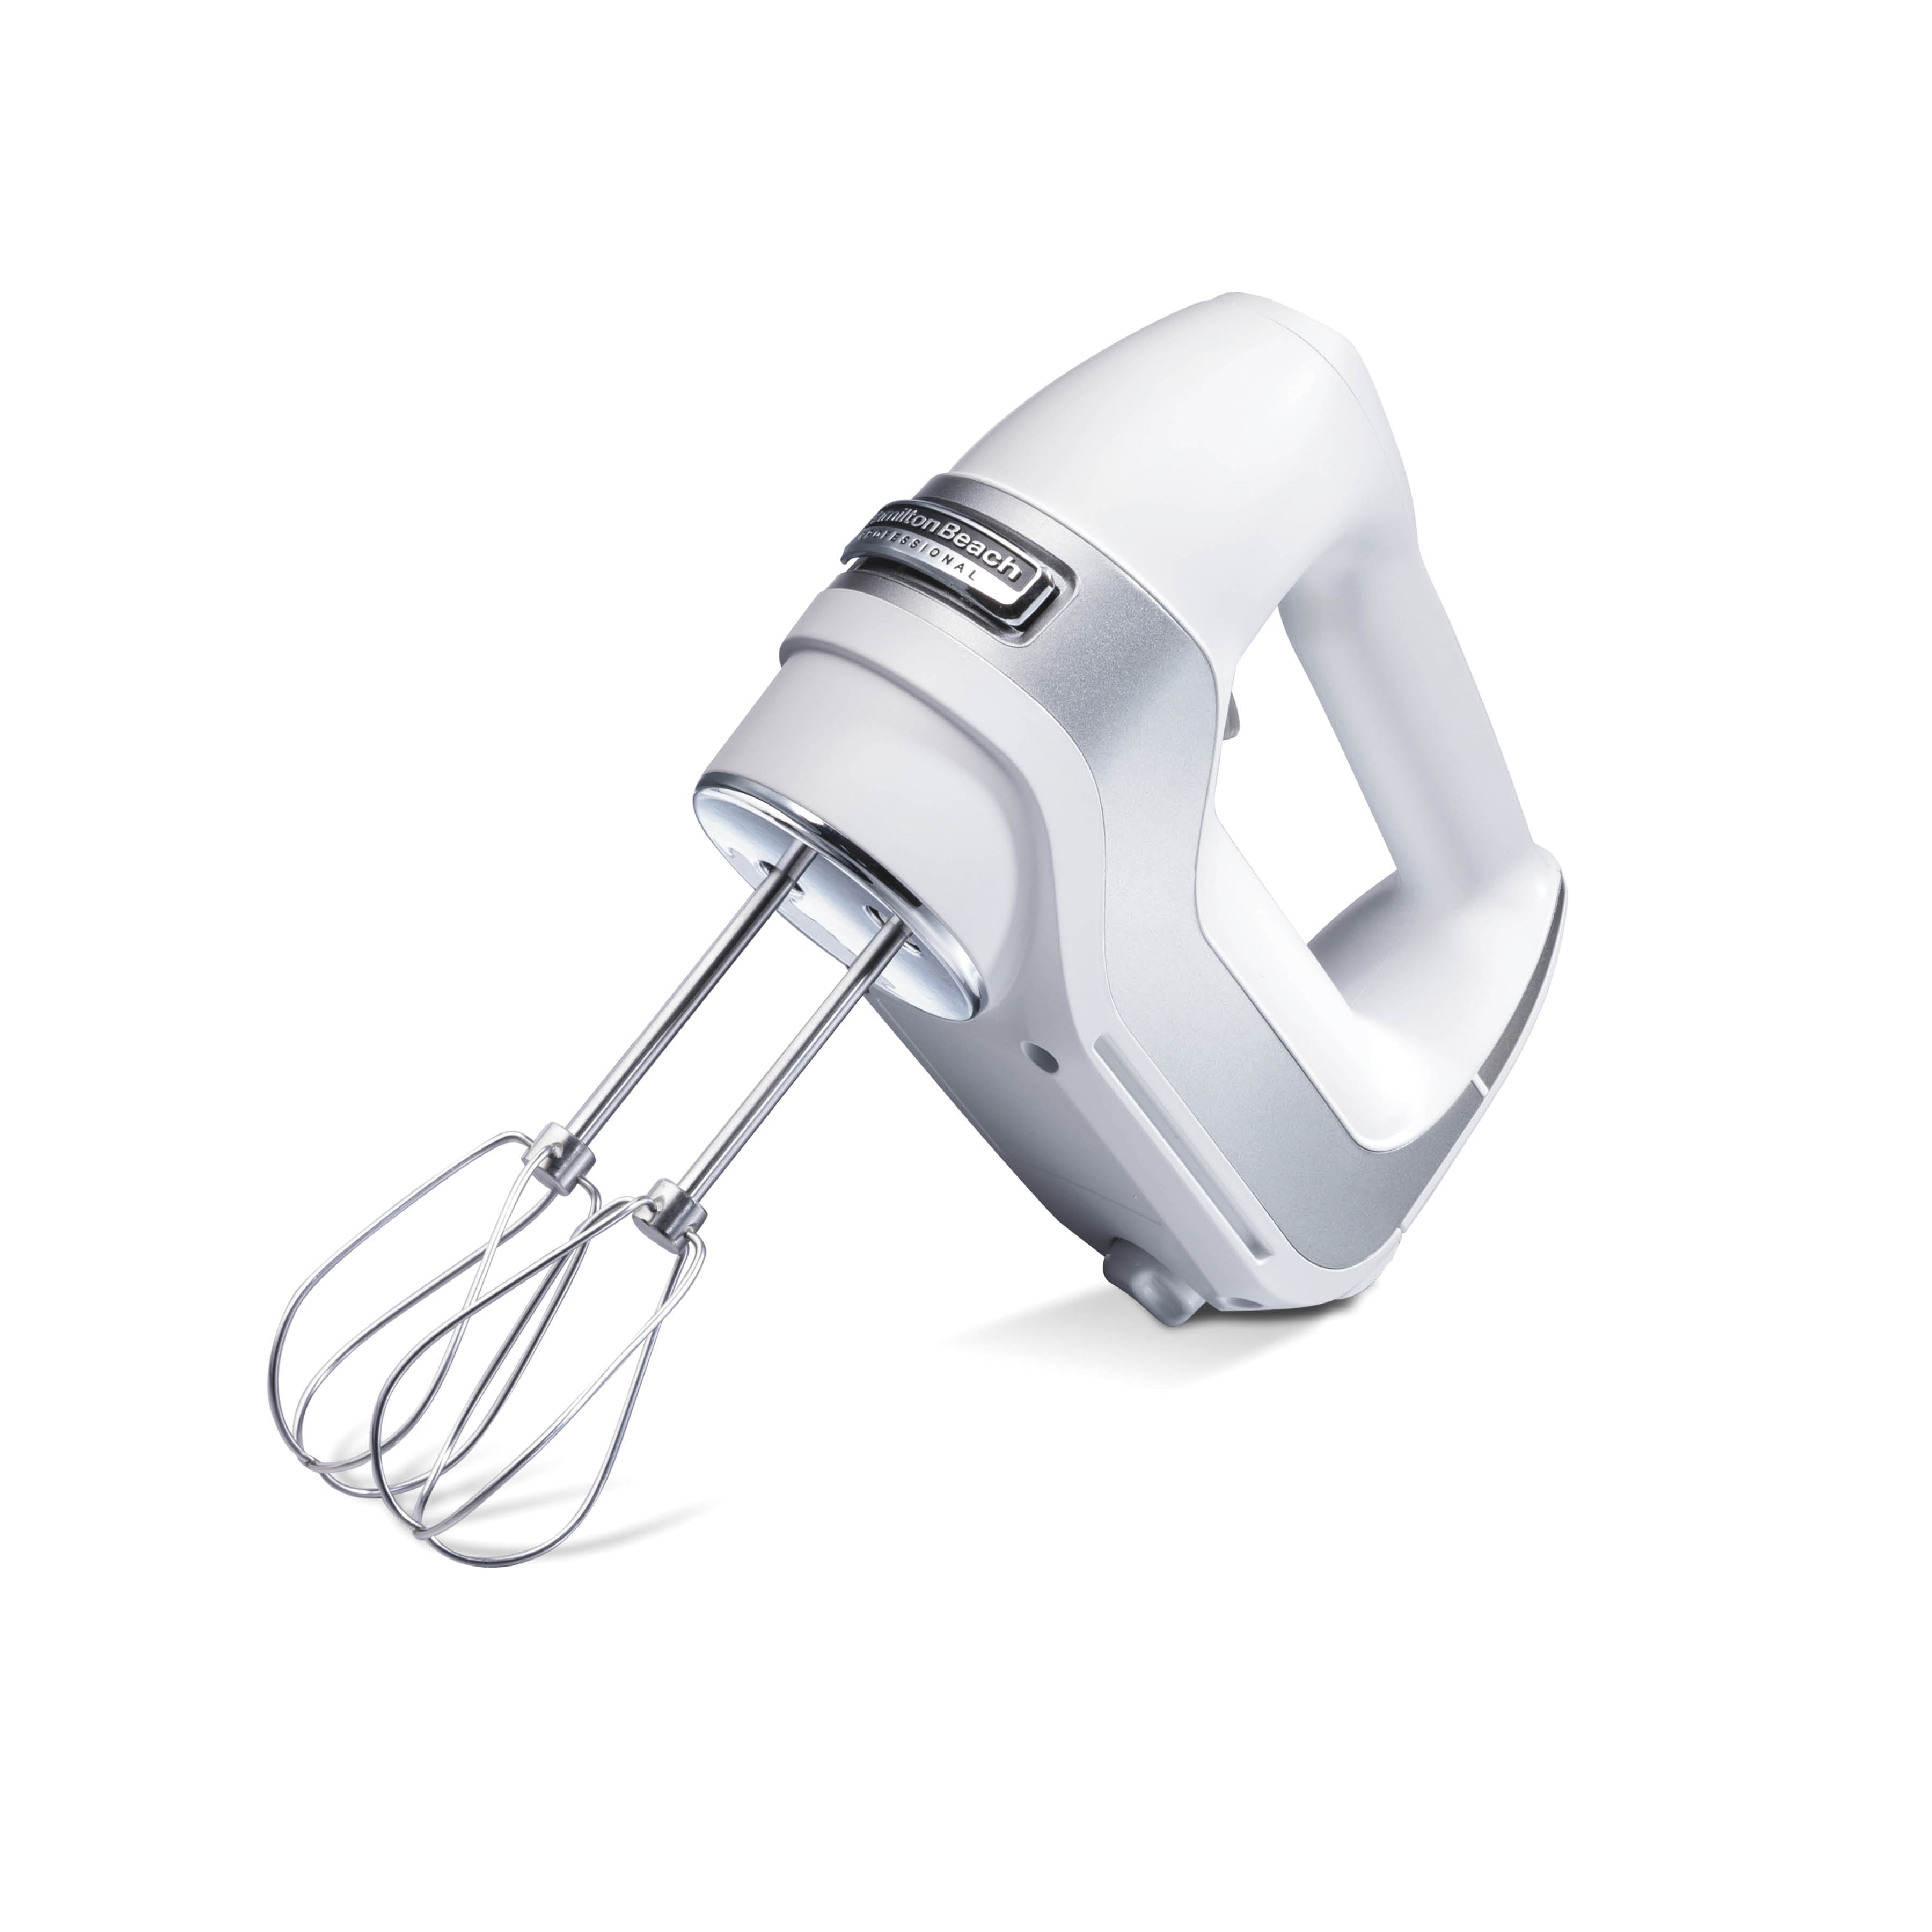  Hamilton Beach Electric Hand Mixer with DC Motor & 3 Speeds,  Wire Beaters, Whisk, Swivel Cord and Bowl Rest White (62661): Home & Kitchen